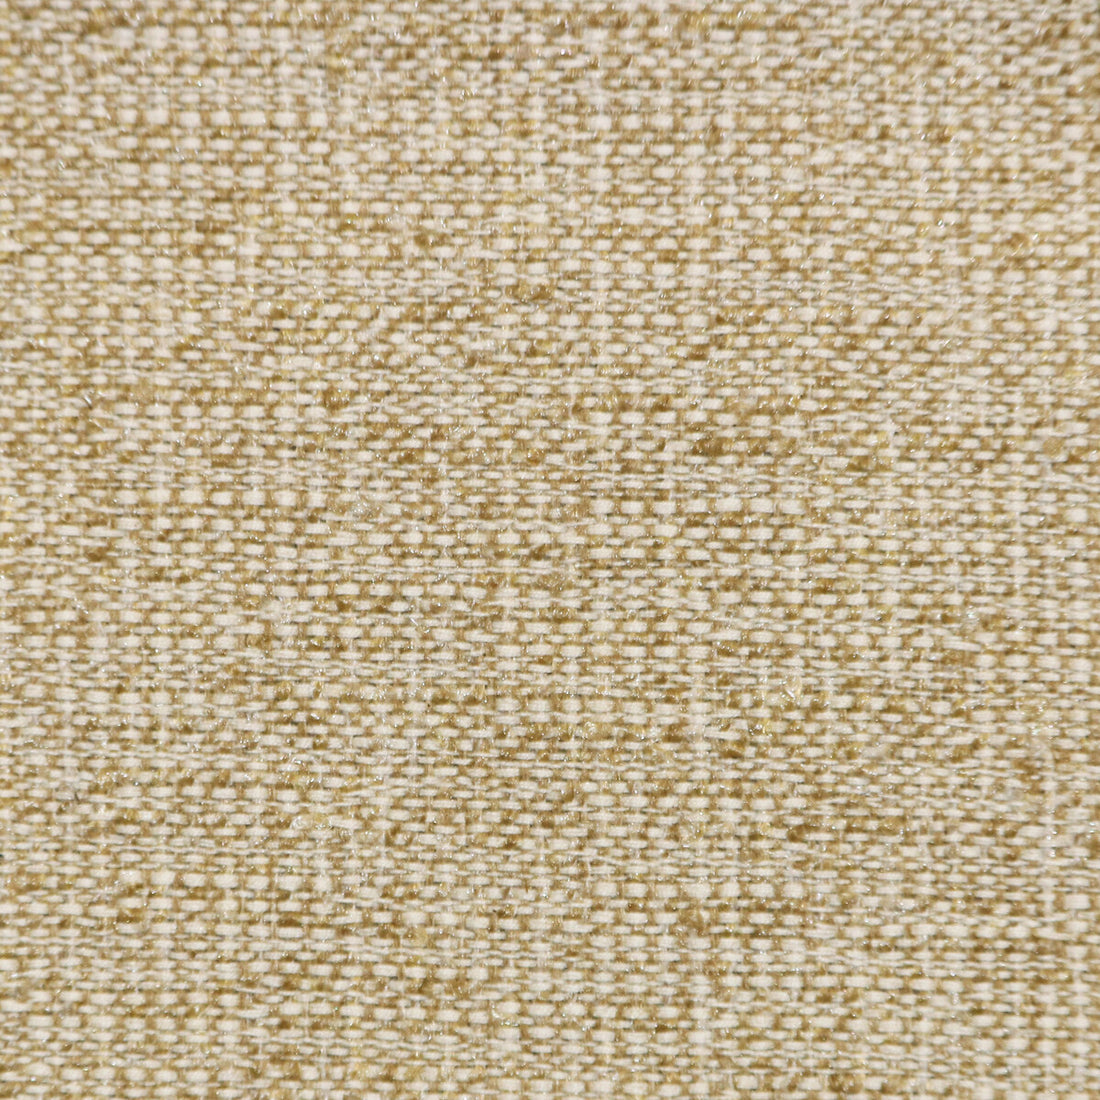 Kravet Smart fabric in 34616-16 color - pattern 34616.16.0 - by Kravet Smart in the Crypton Home collection